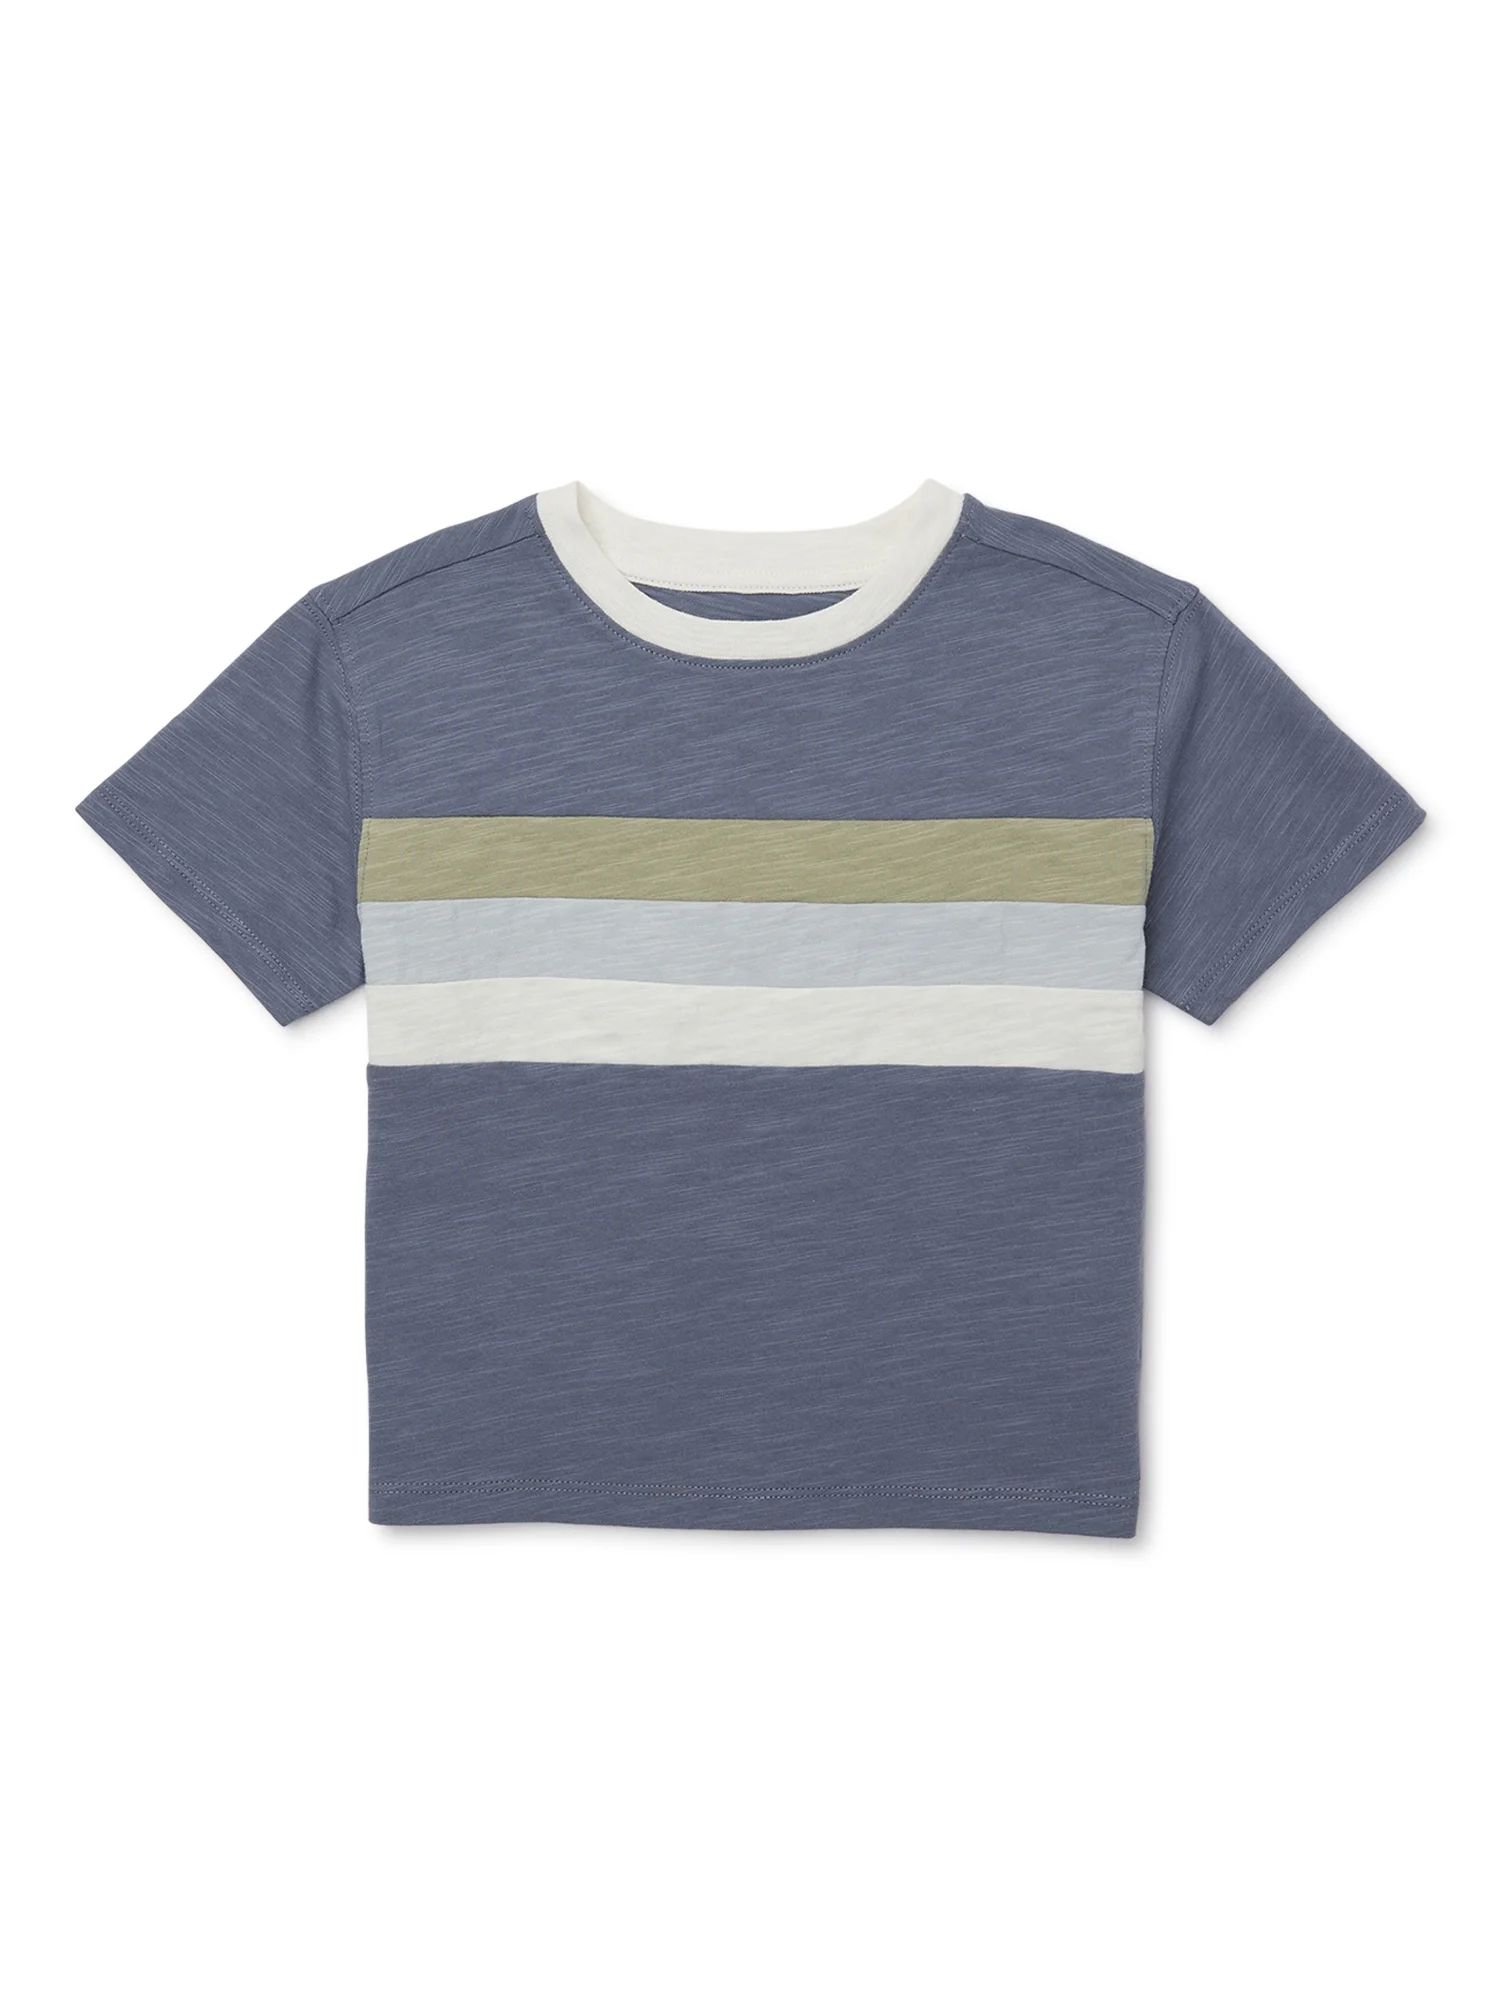 easy-peasy Toddler Boys? Striped Ringer T-Shirt with Short Sleeves, Sizes 18M-5T | Walmart (US)